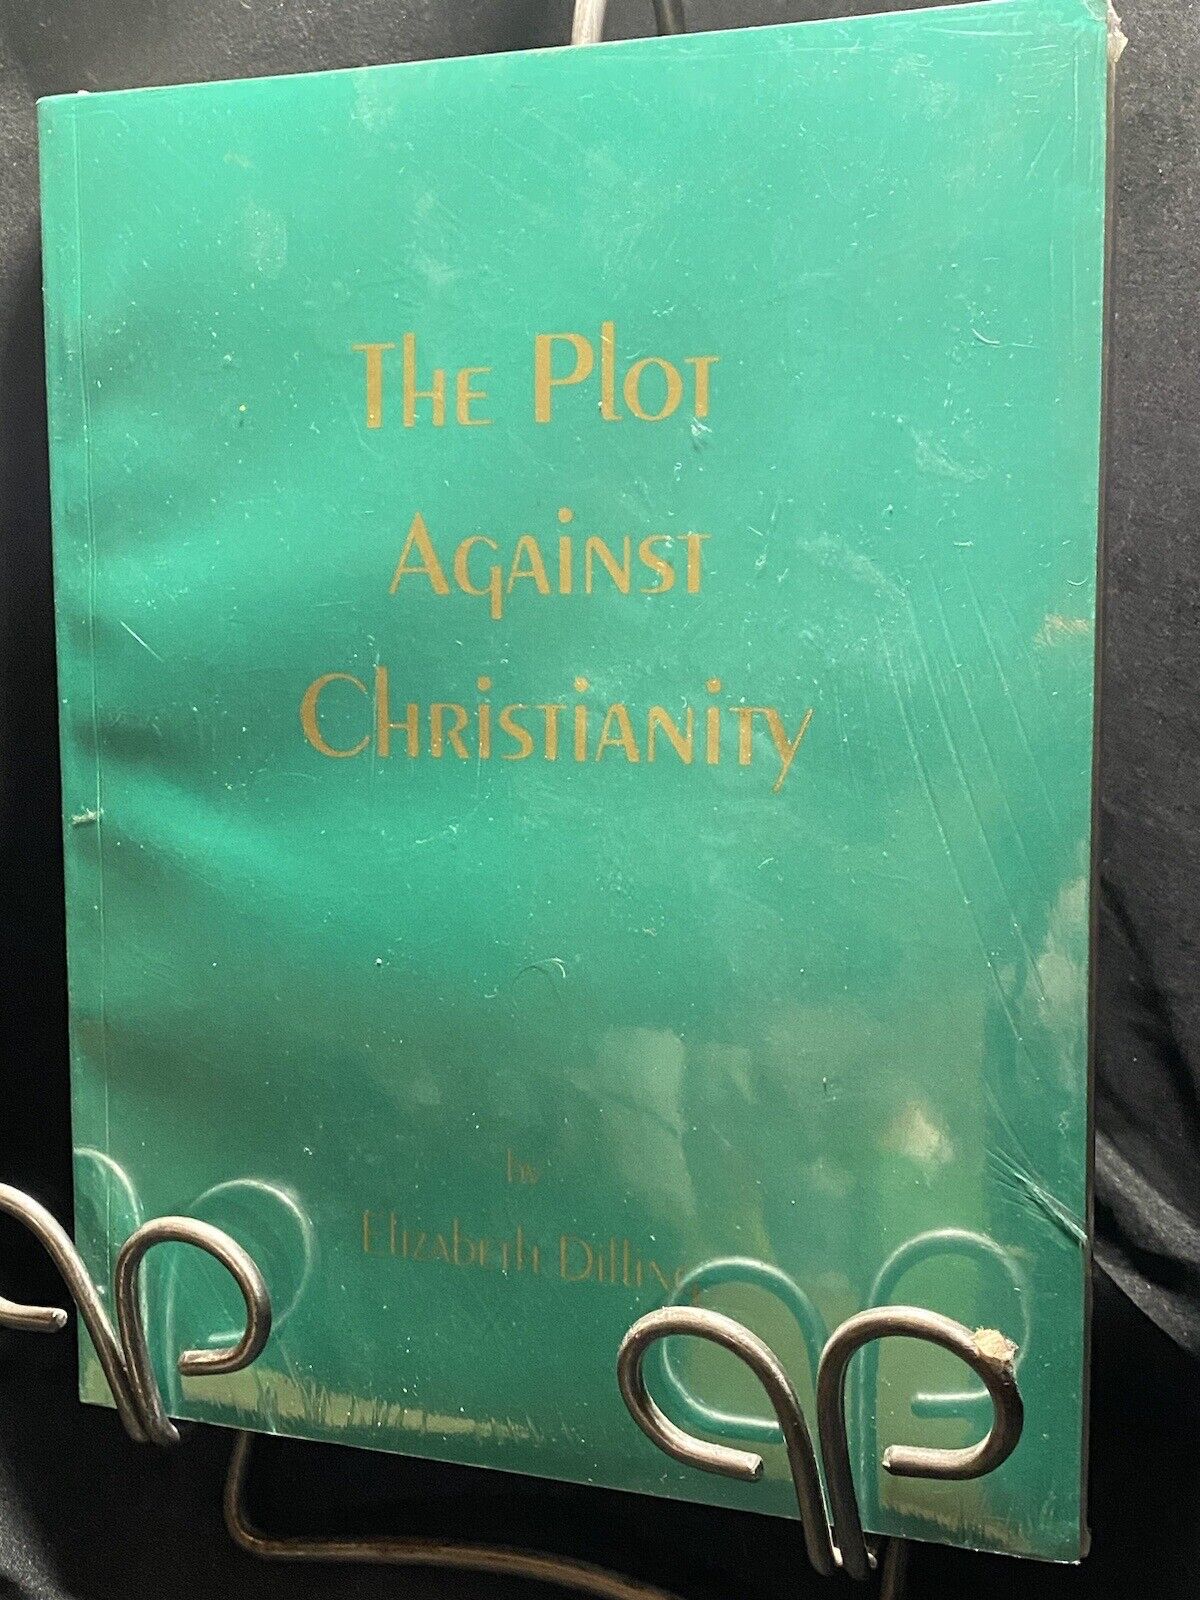 The Plot Against Christianity Elizabeth Dilling EXTREMELY RARE COPY BANNED BOOK